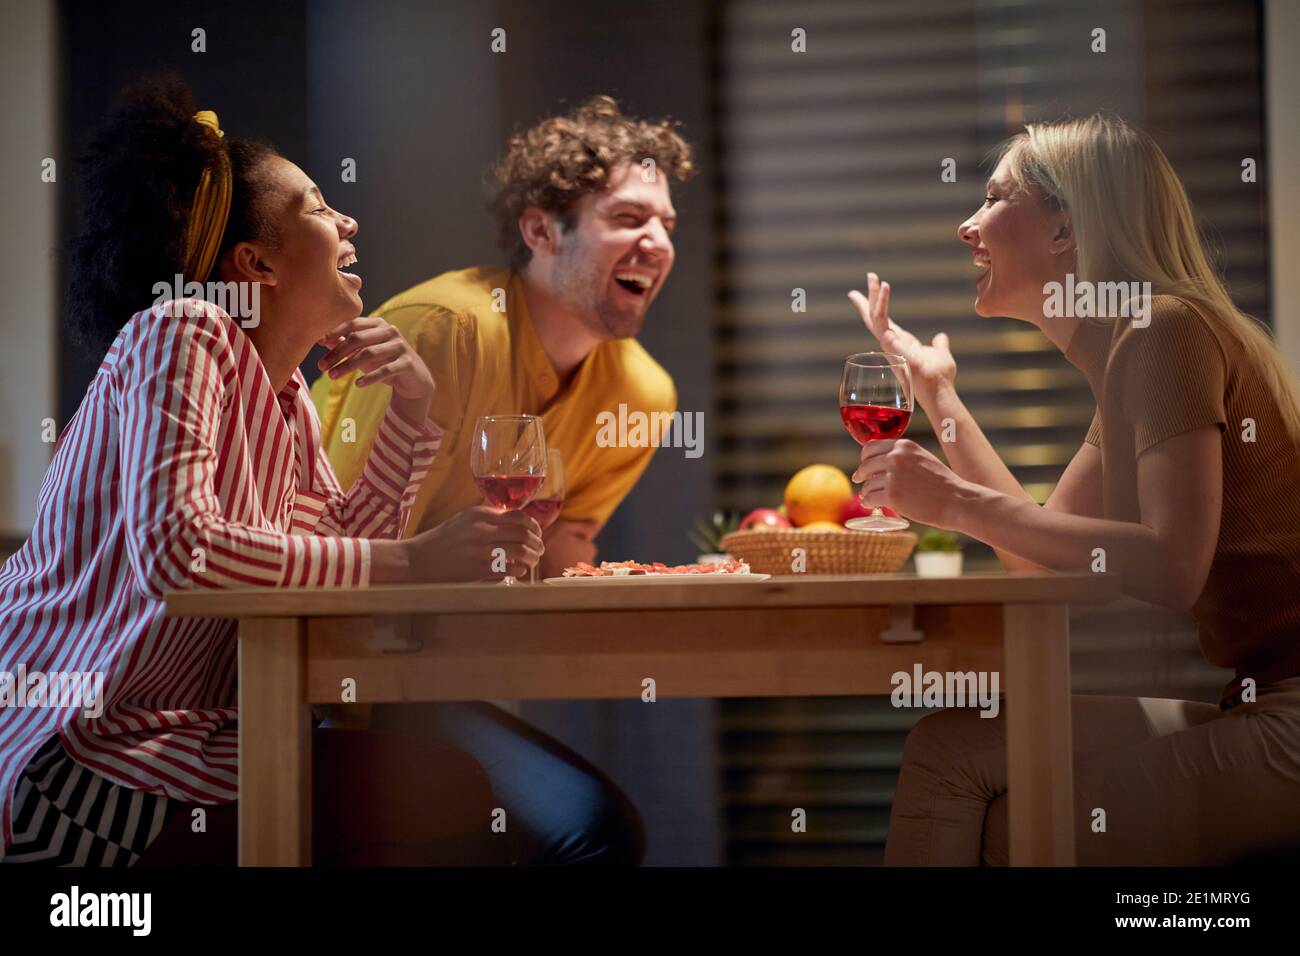 Group of three happy friends having home gathering together Stock Photo